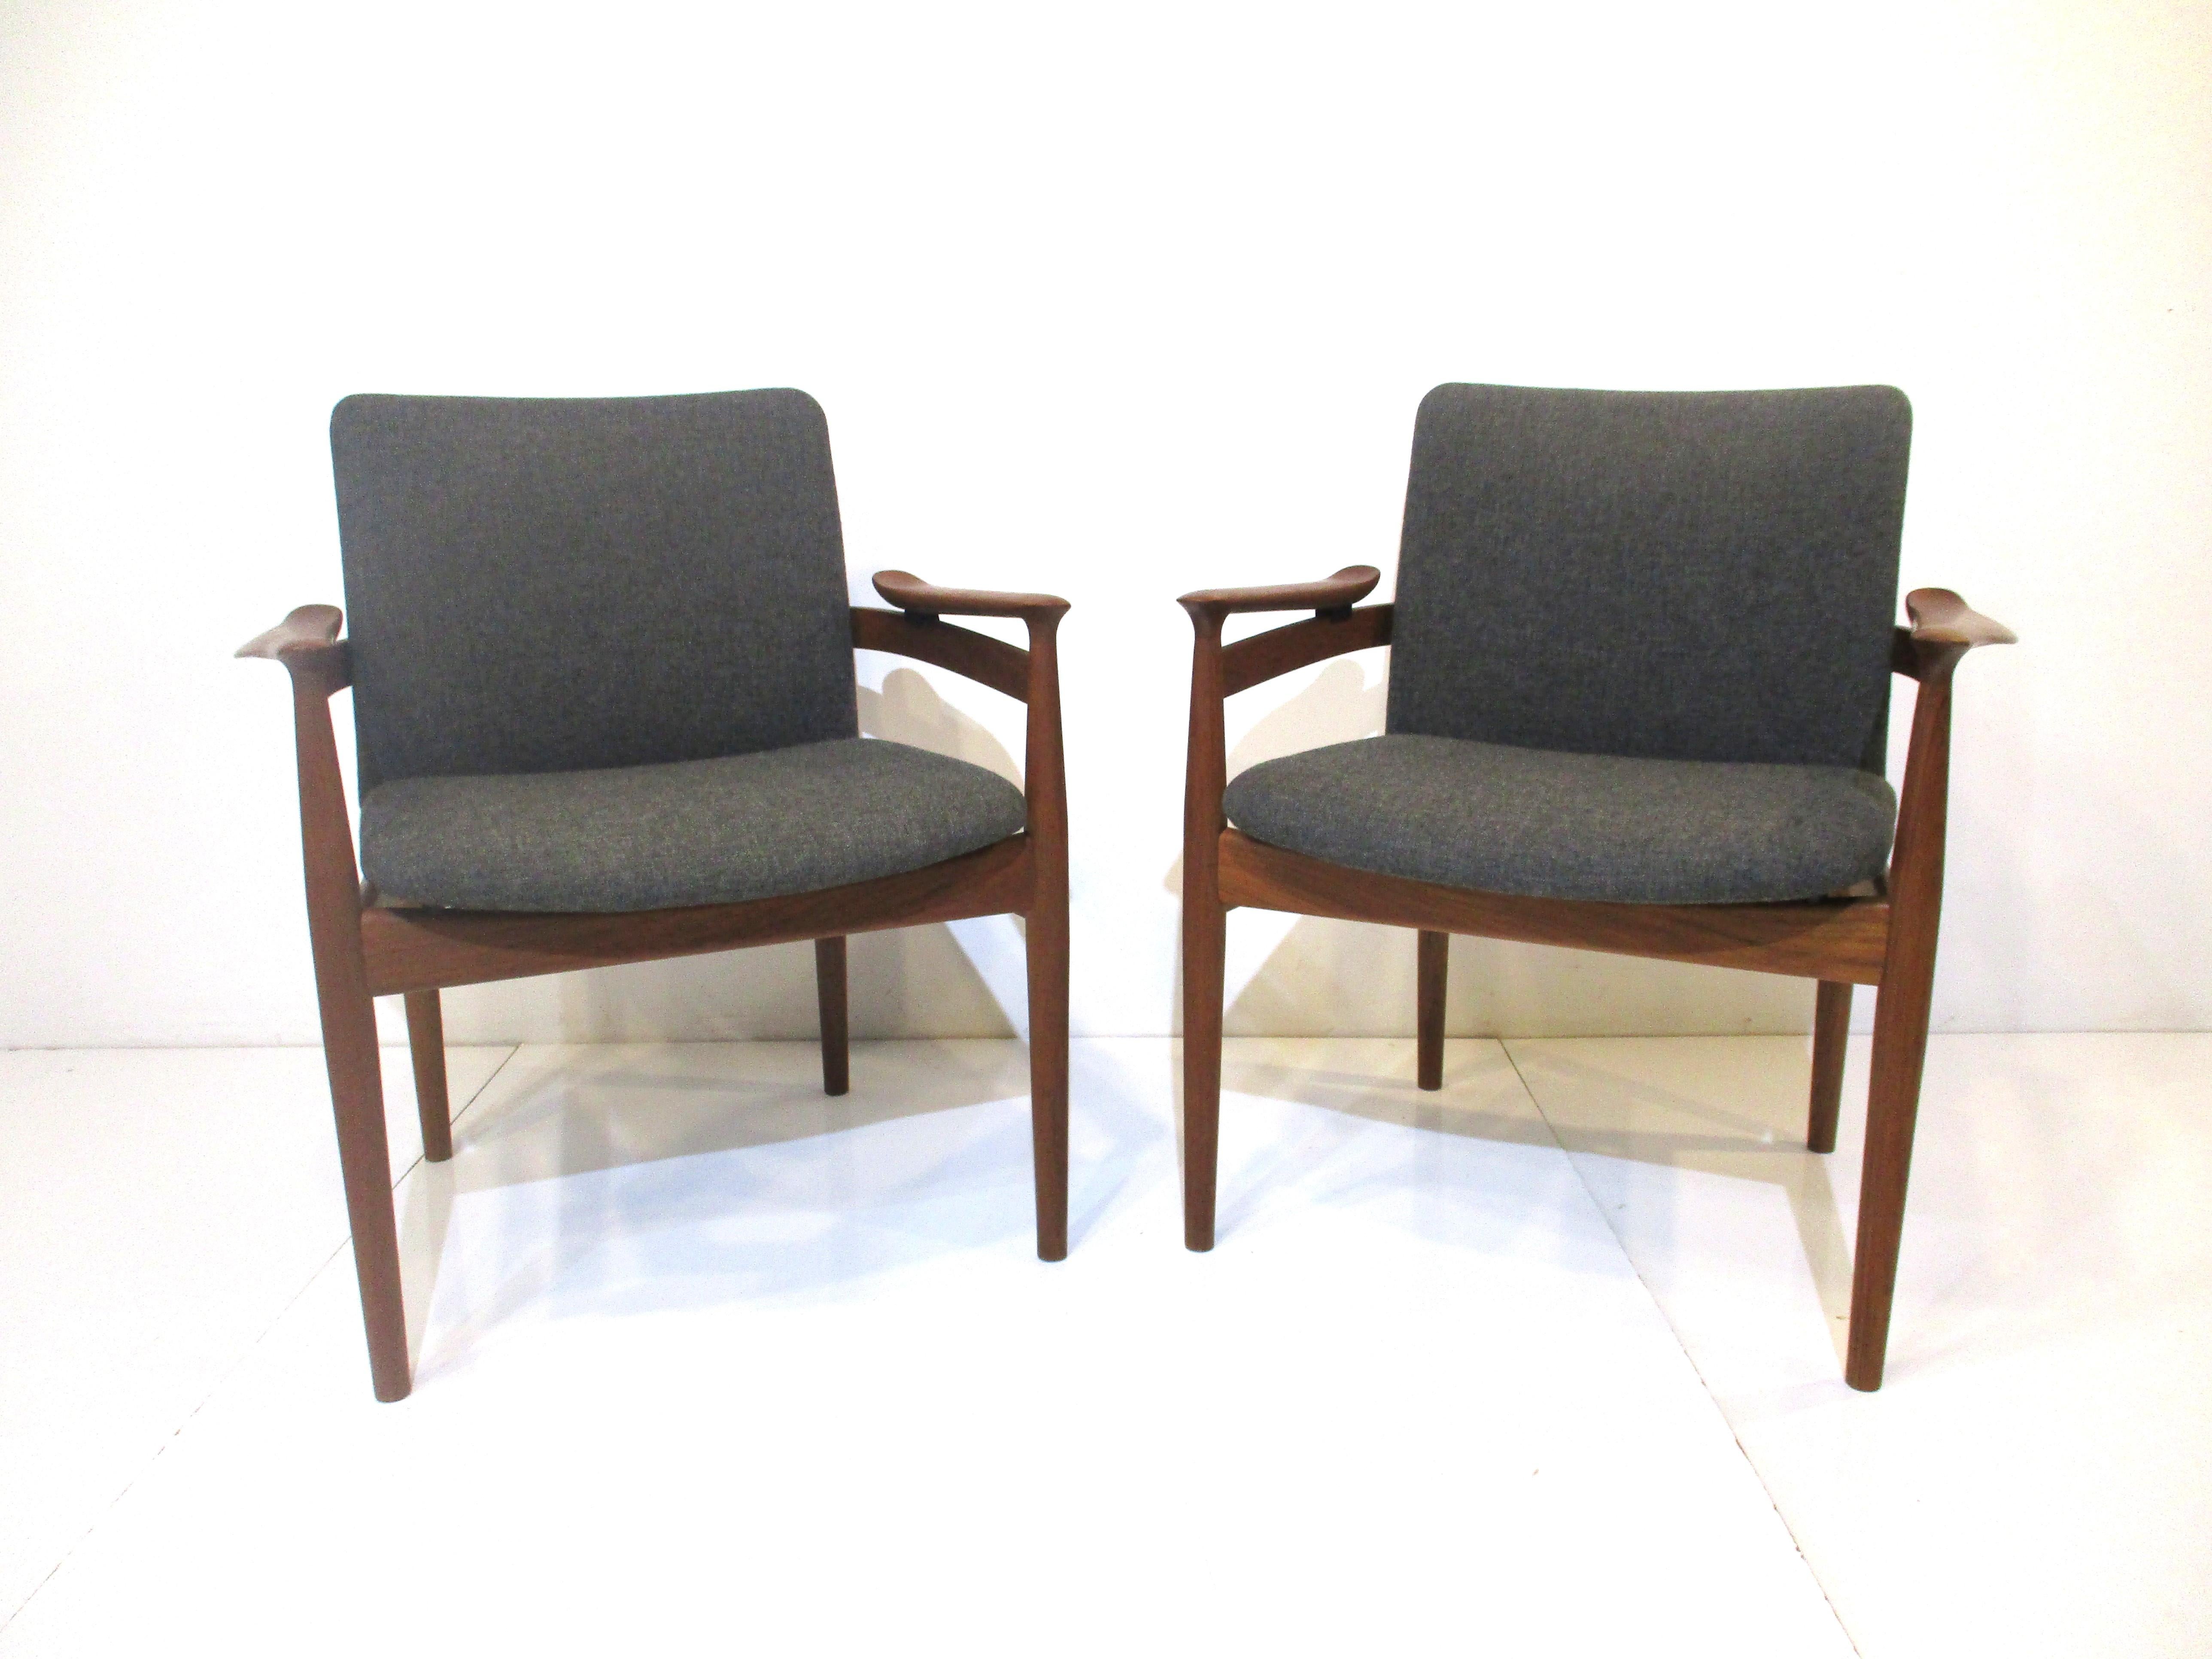 A pair of solid teak arm chairs with original gray tightly woven upholstered seats and wonderfully formed sculptural arms. From the iconic Danish designer Finn Juhl who's works transcended from a long line of skilled cabinet makers and artists who